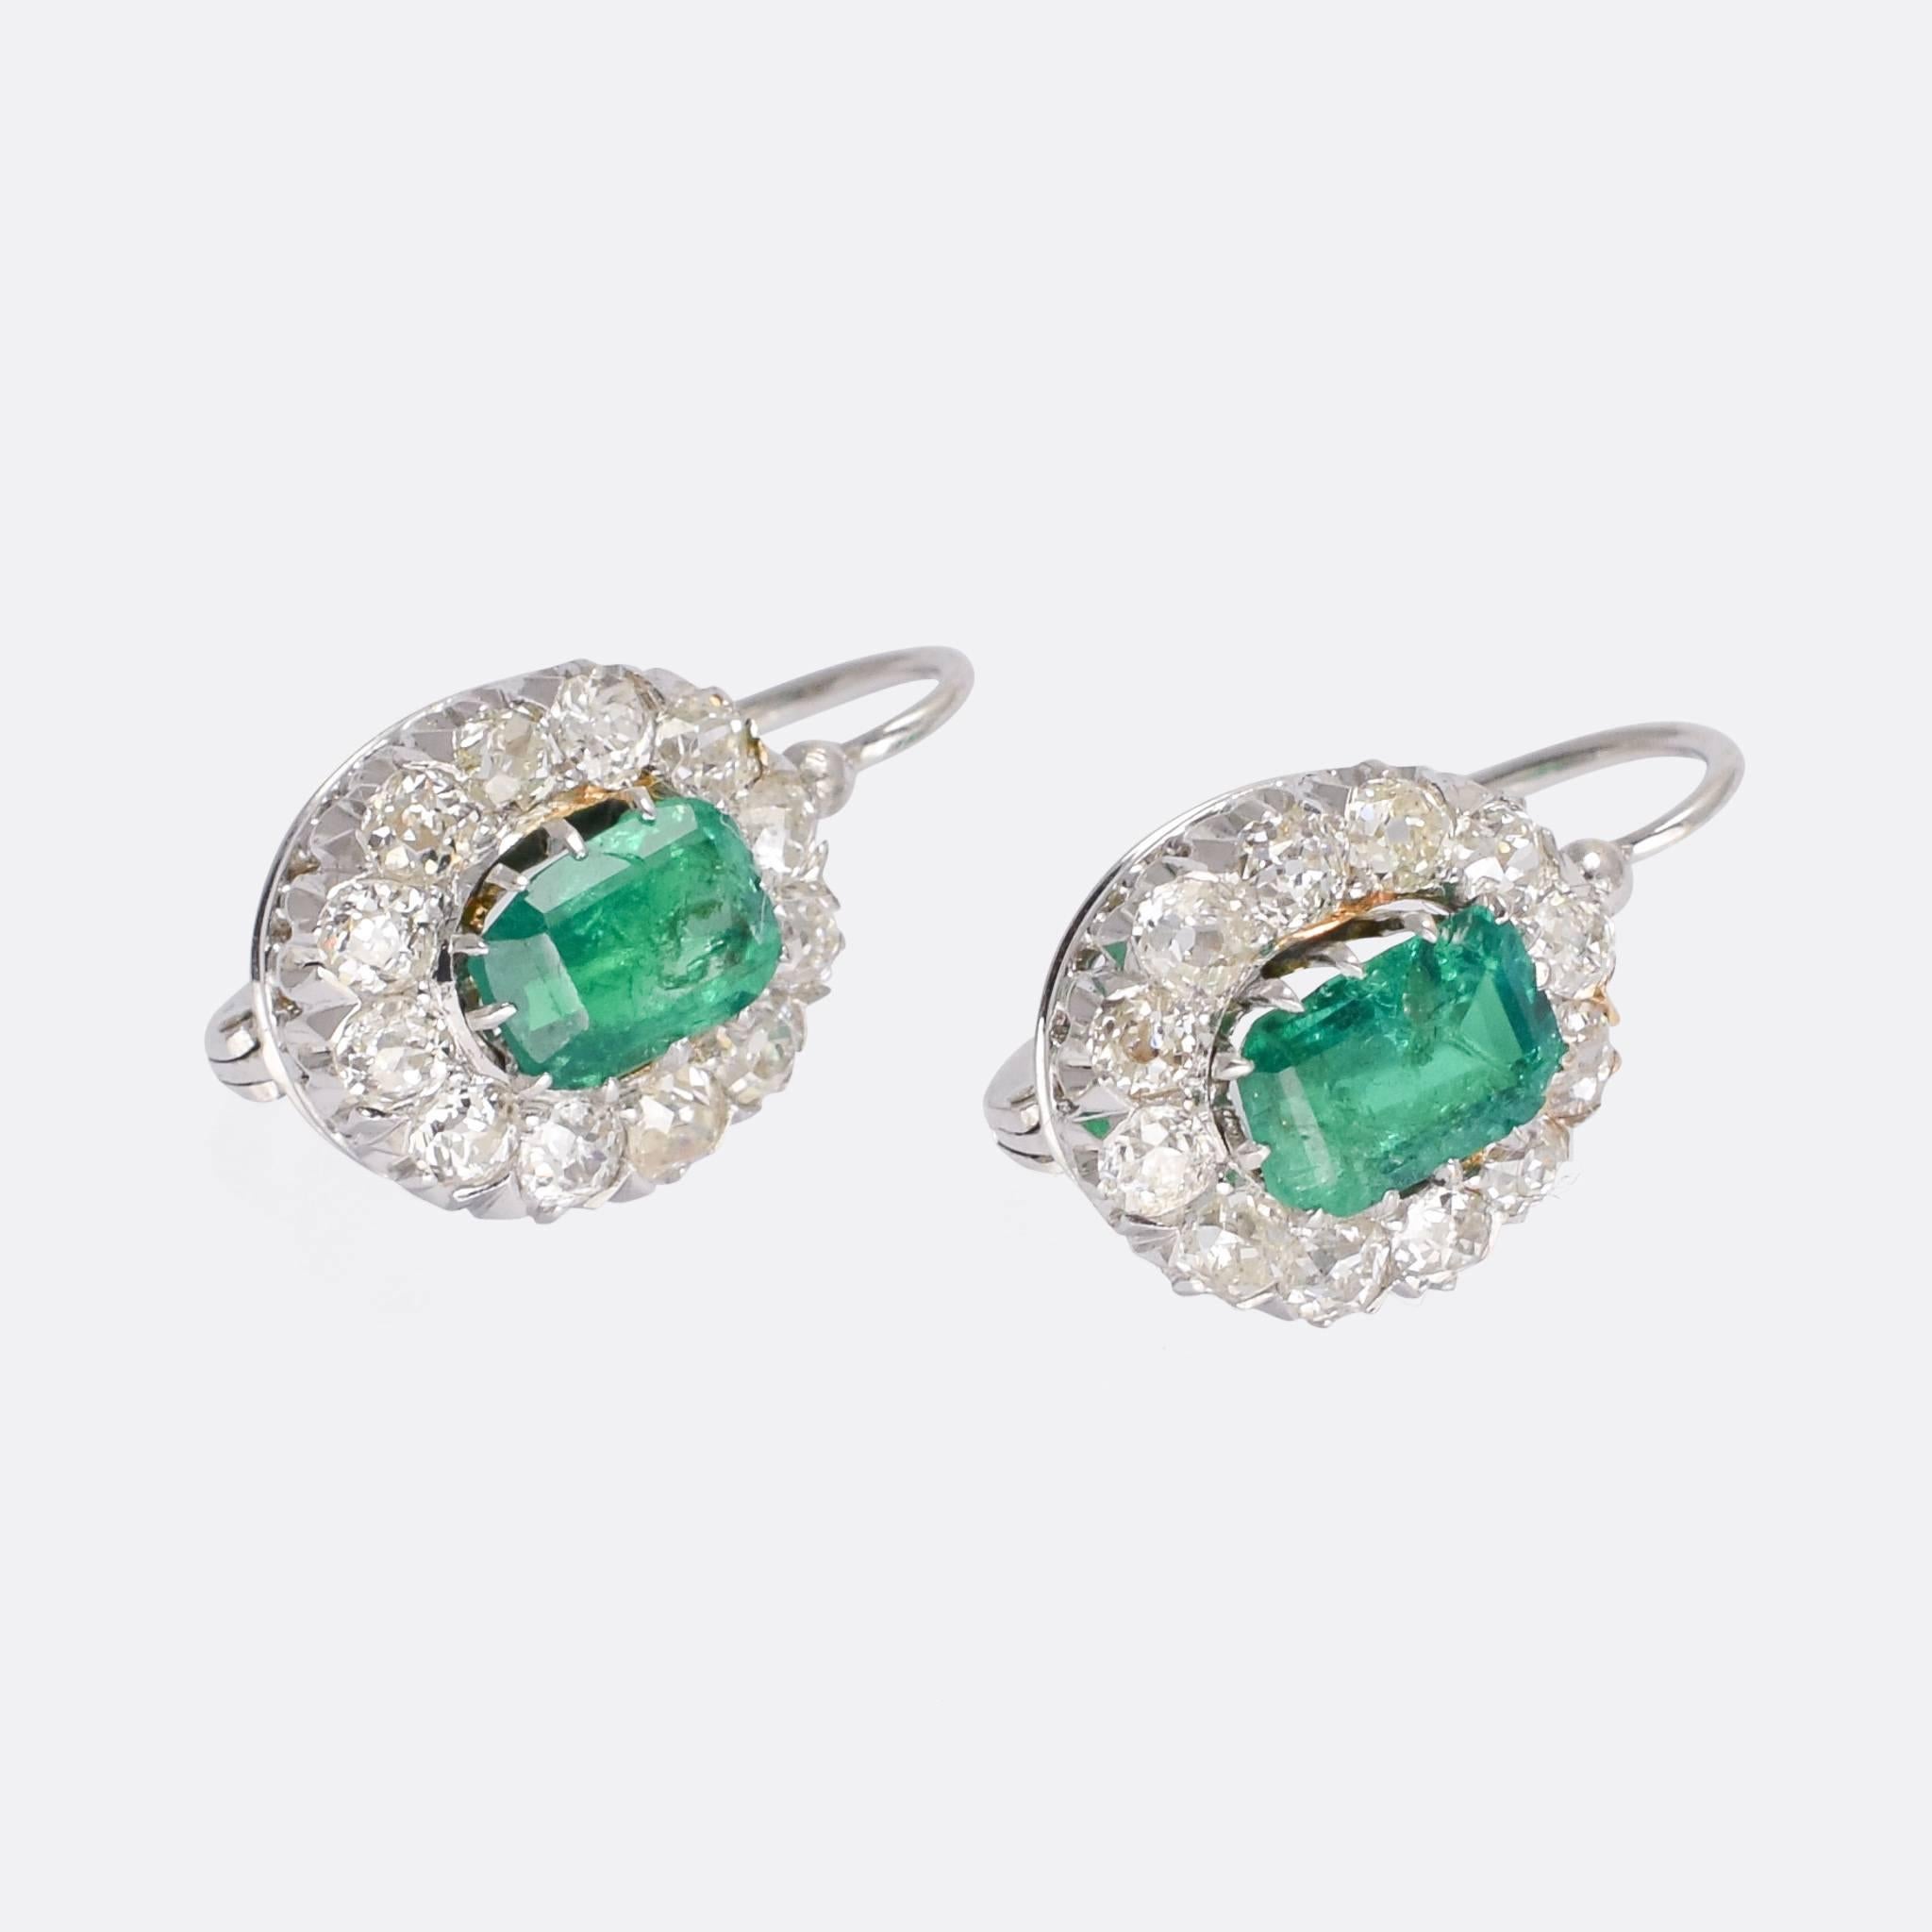 A fine pair of antique cluster earrings set with emeralds and old mine cut diamonds. They have lever backs, that close securely at the top, and the stones rest in fine claw settings; each emerald weighs around 0.75 carats, and each earring is home